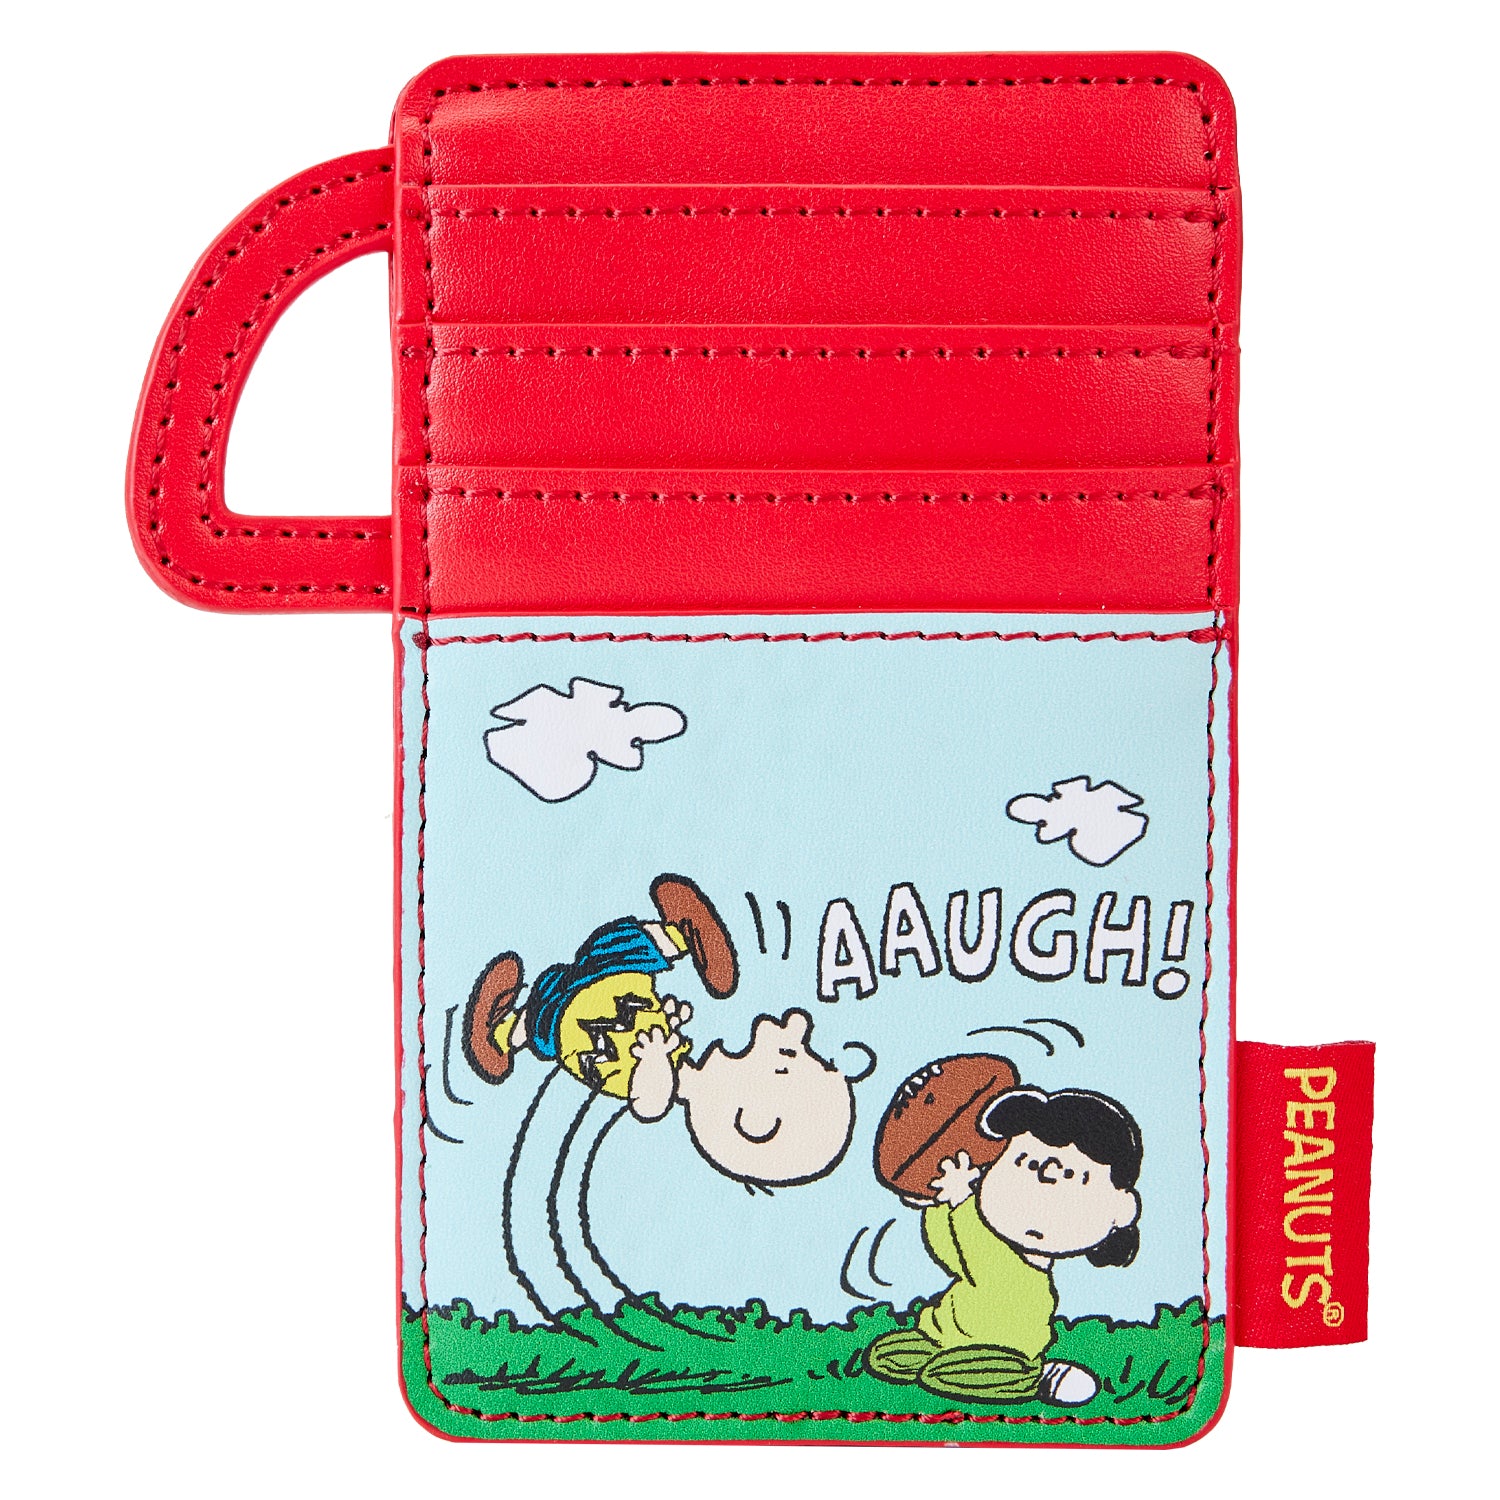 Loungefly Peanuts Charlie Brown Thermos Cardholder